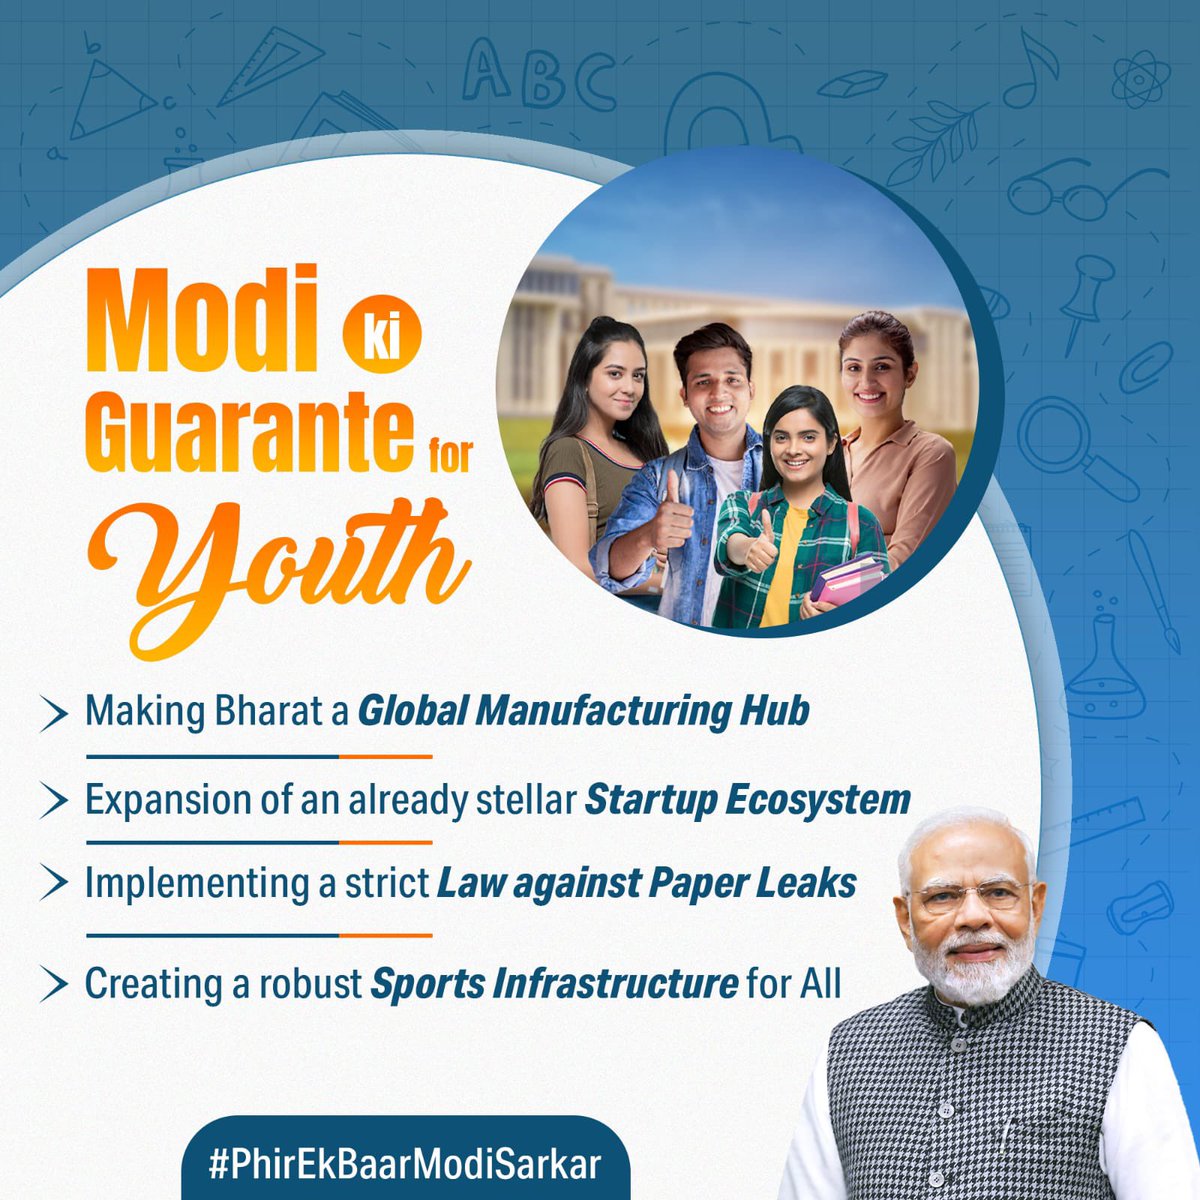 The youth of India deserves a government with a vision to unlock their potential and support their ambitions. The Modi Govt has and will always strive to create better opportunities for Bharat’s youth. #PhirEkBaarModiSarkar